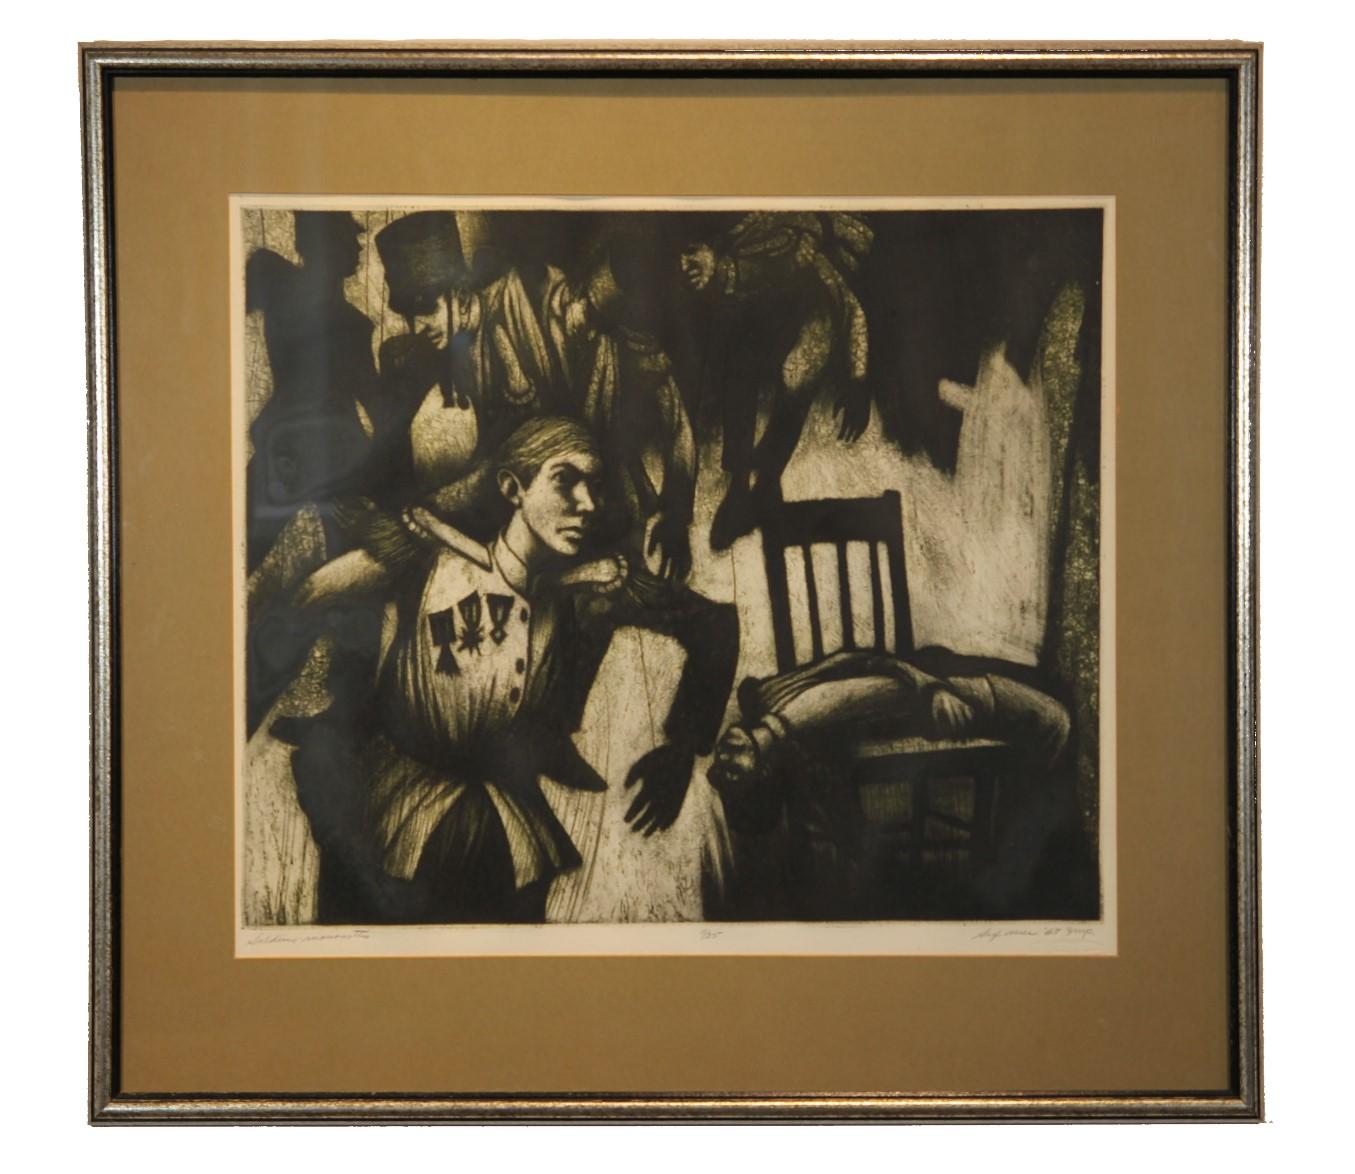 Donald Sexauer Abstract Print - "Soldier Marionettes" Surrealist Figurative Lithograph